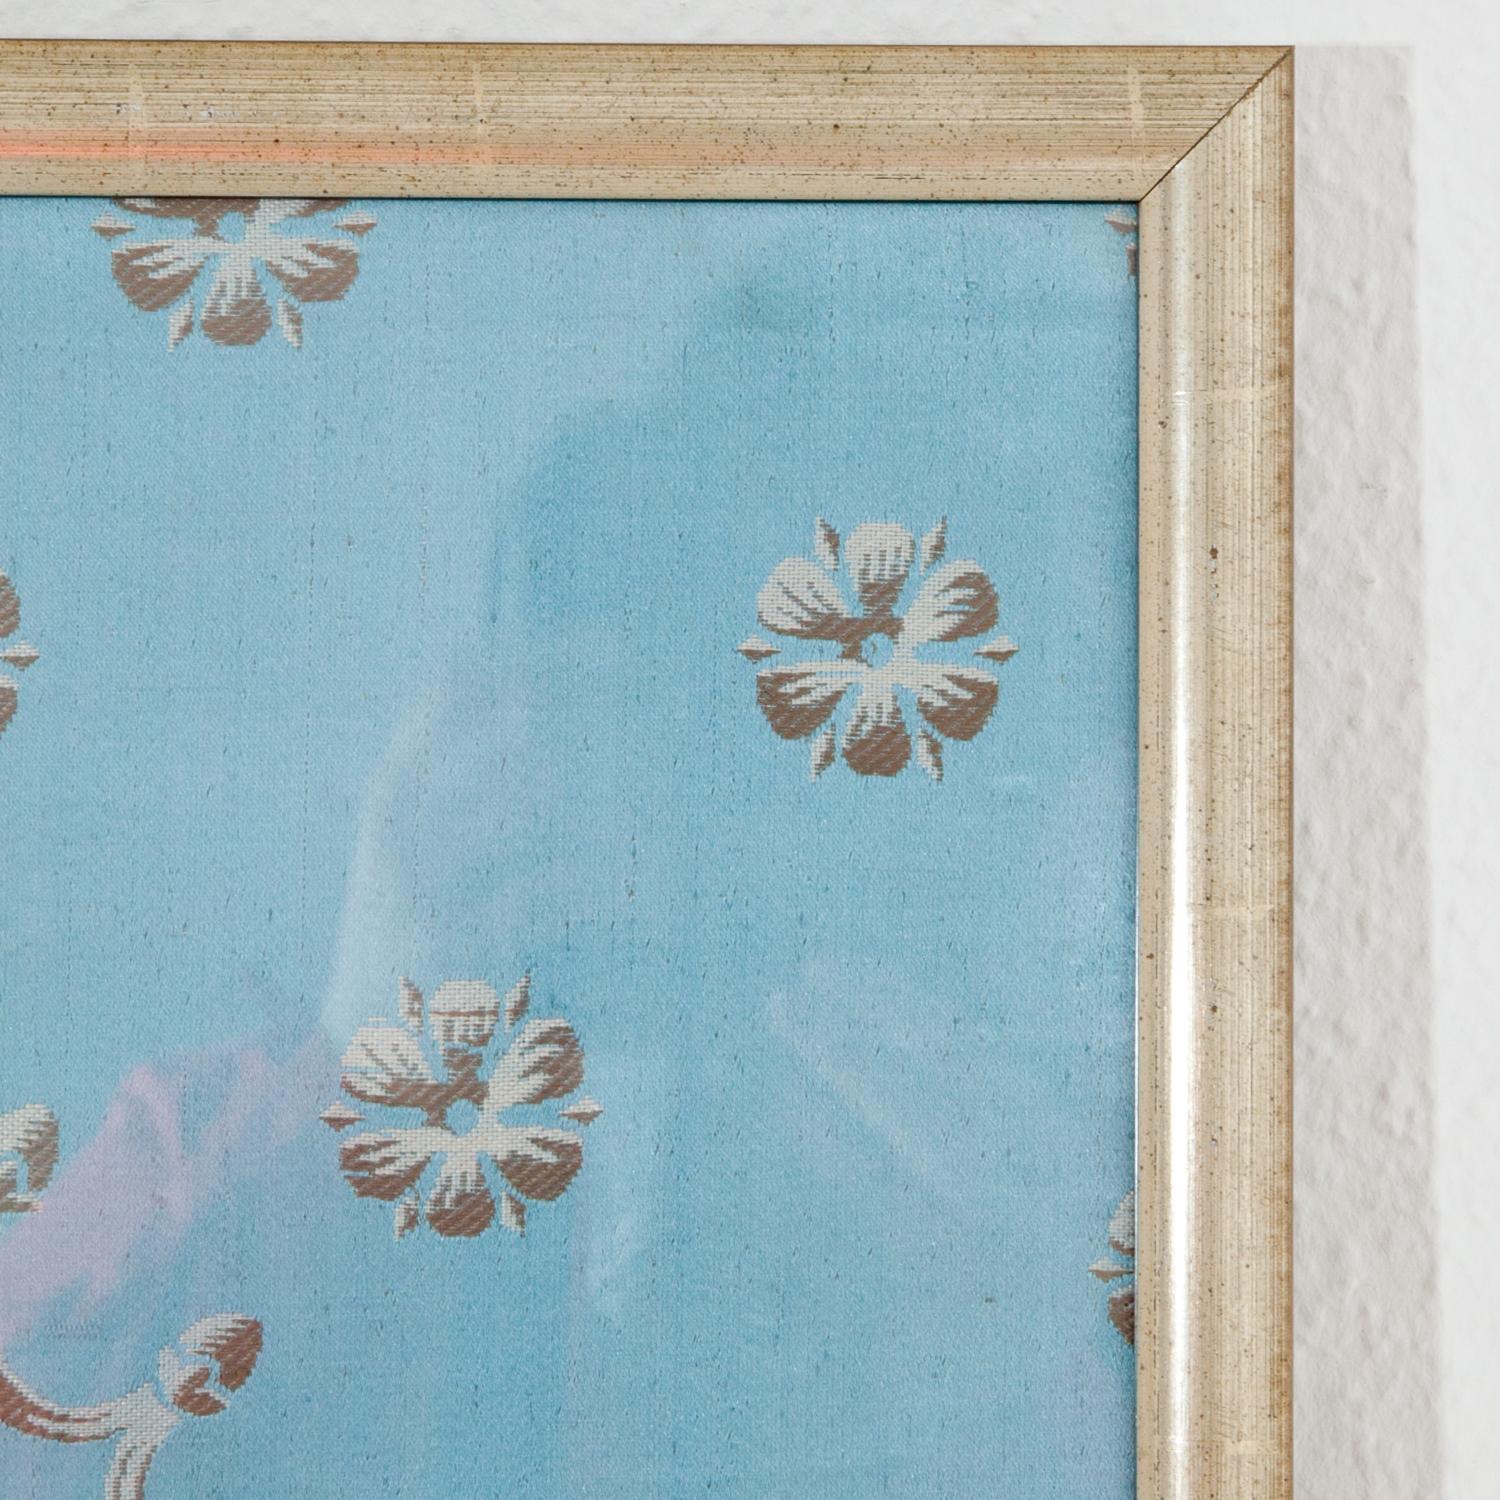 French fabric sample of circa 1810, framed behind glass. Silver vase and flower décor on a light blue field.